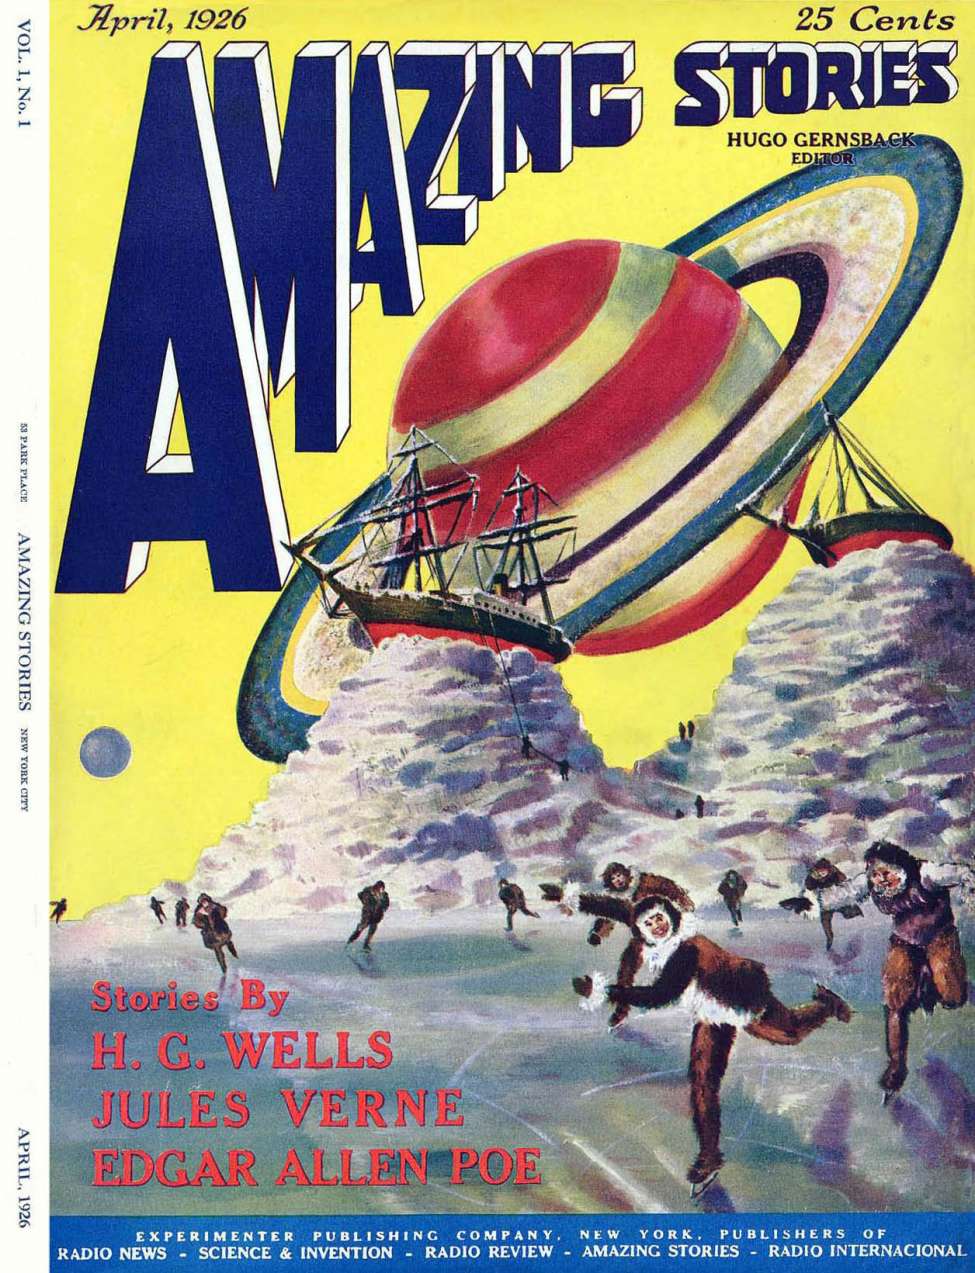 Book Cover For Amazing Stories v1 1 - Off on a Comet - Jules Verne p1